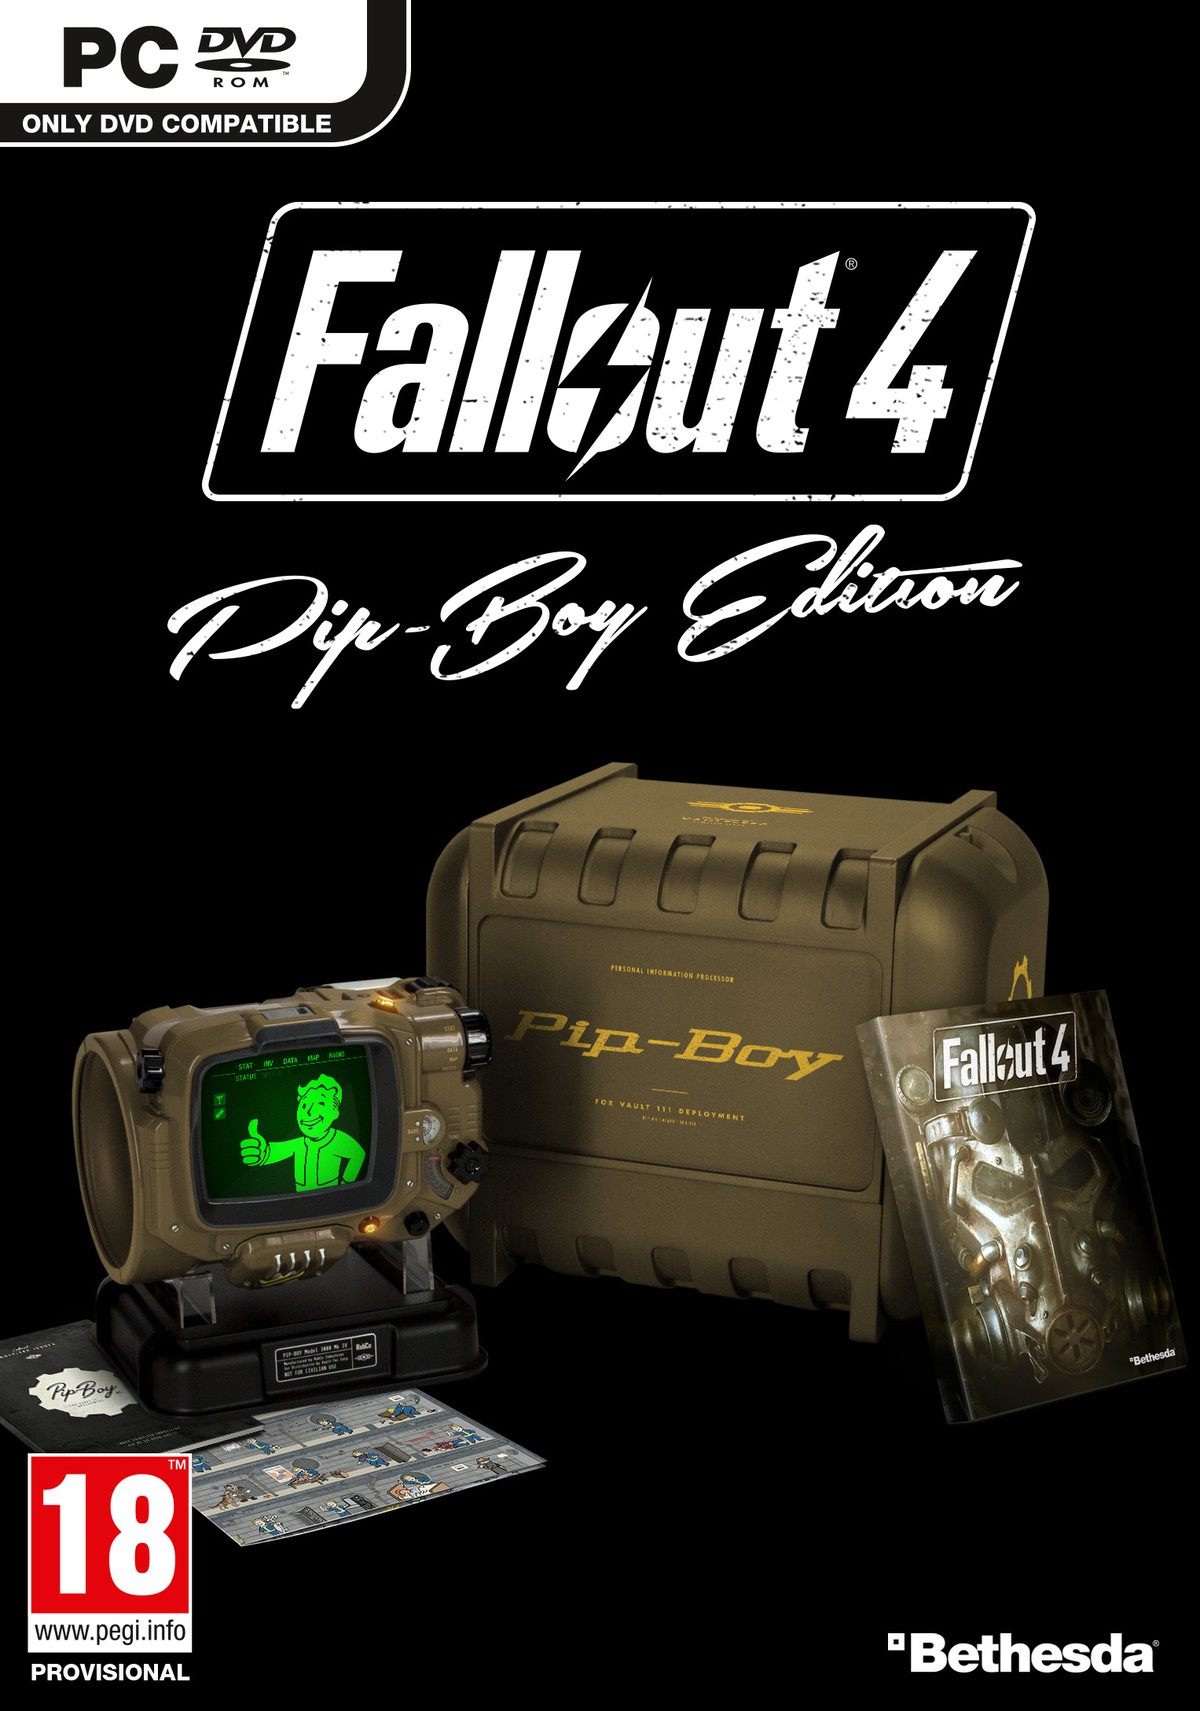 Fallout 4 gold kit for color pipboy фото 106